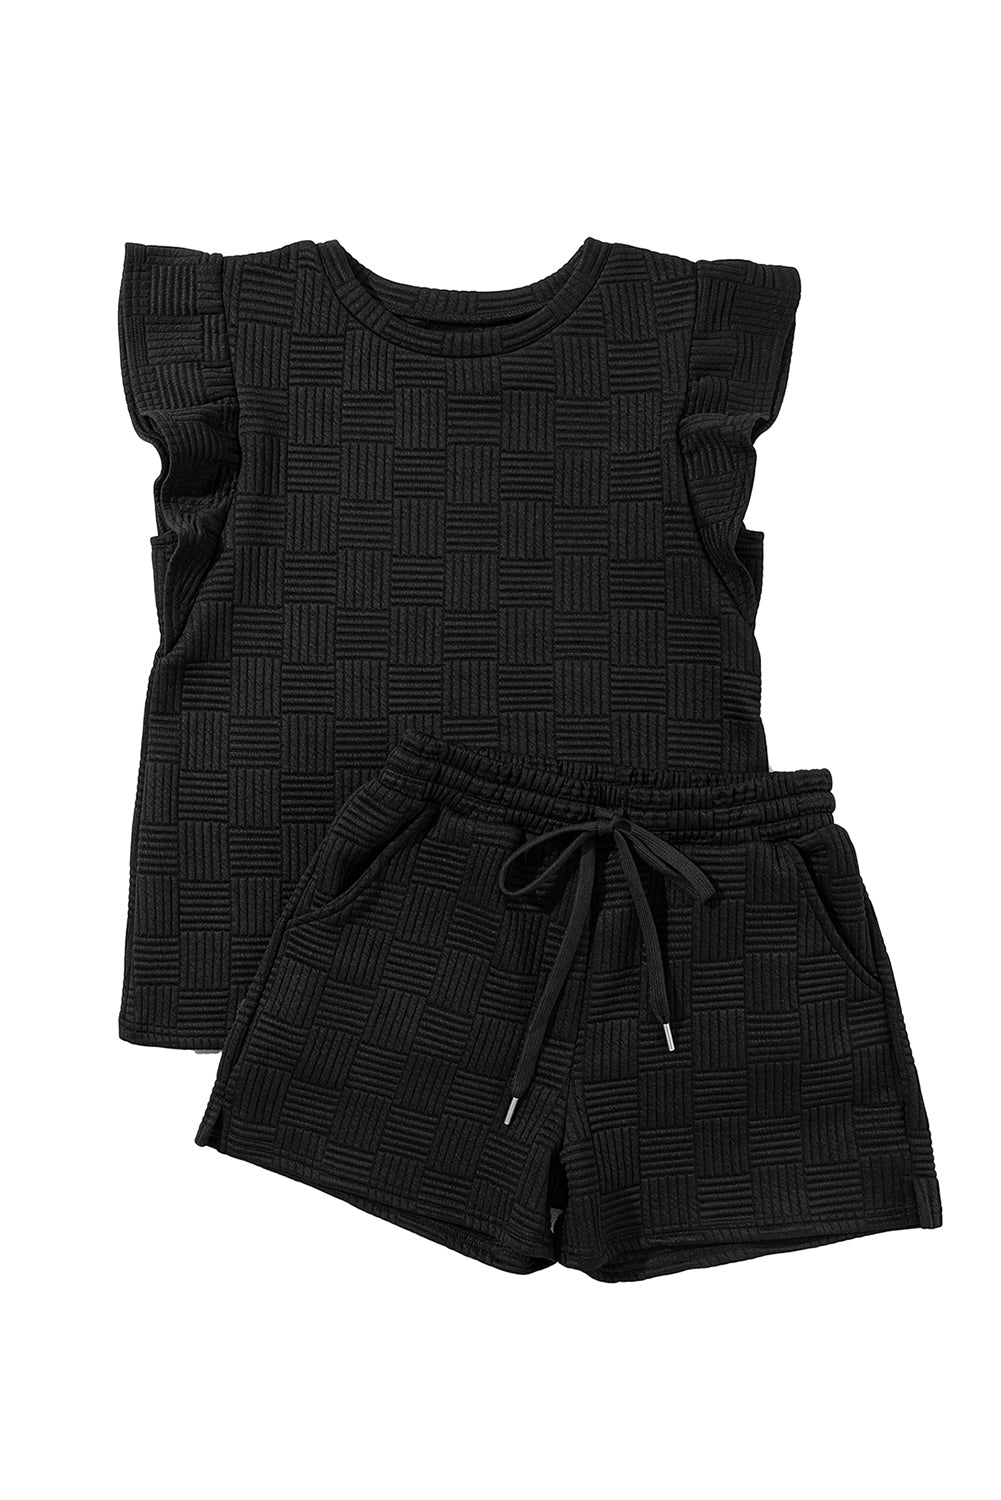 Black Textured Ruffled Sleeve Tee and Drawstring Shorts Set (Takes 2 Weeks Delivery)